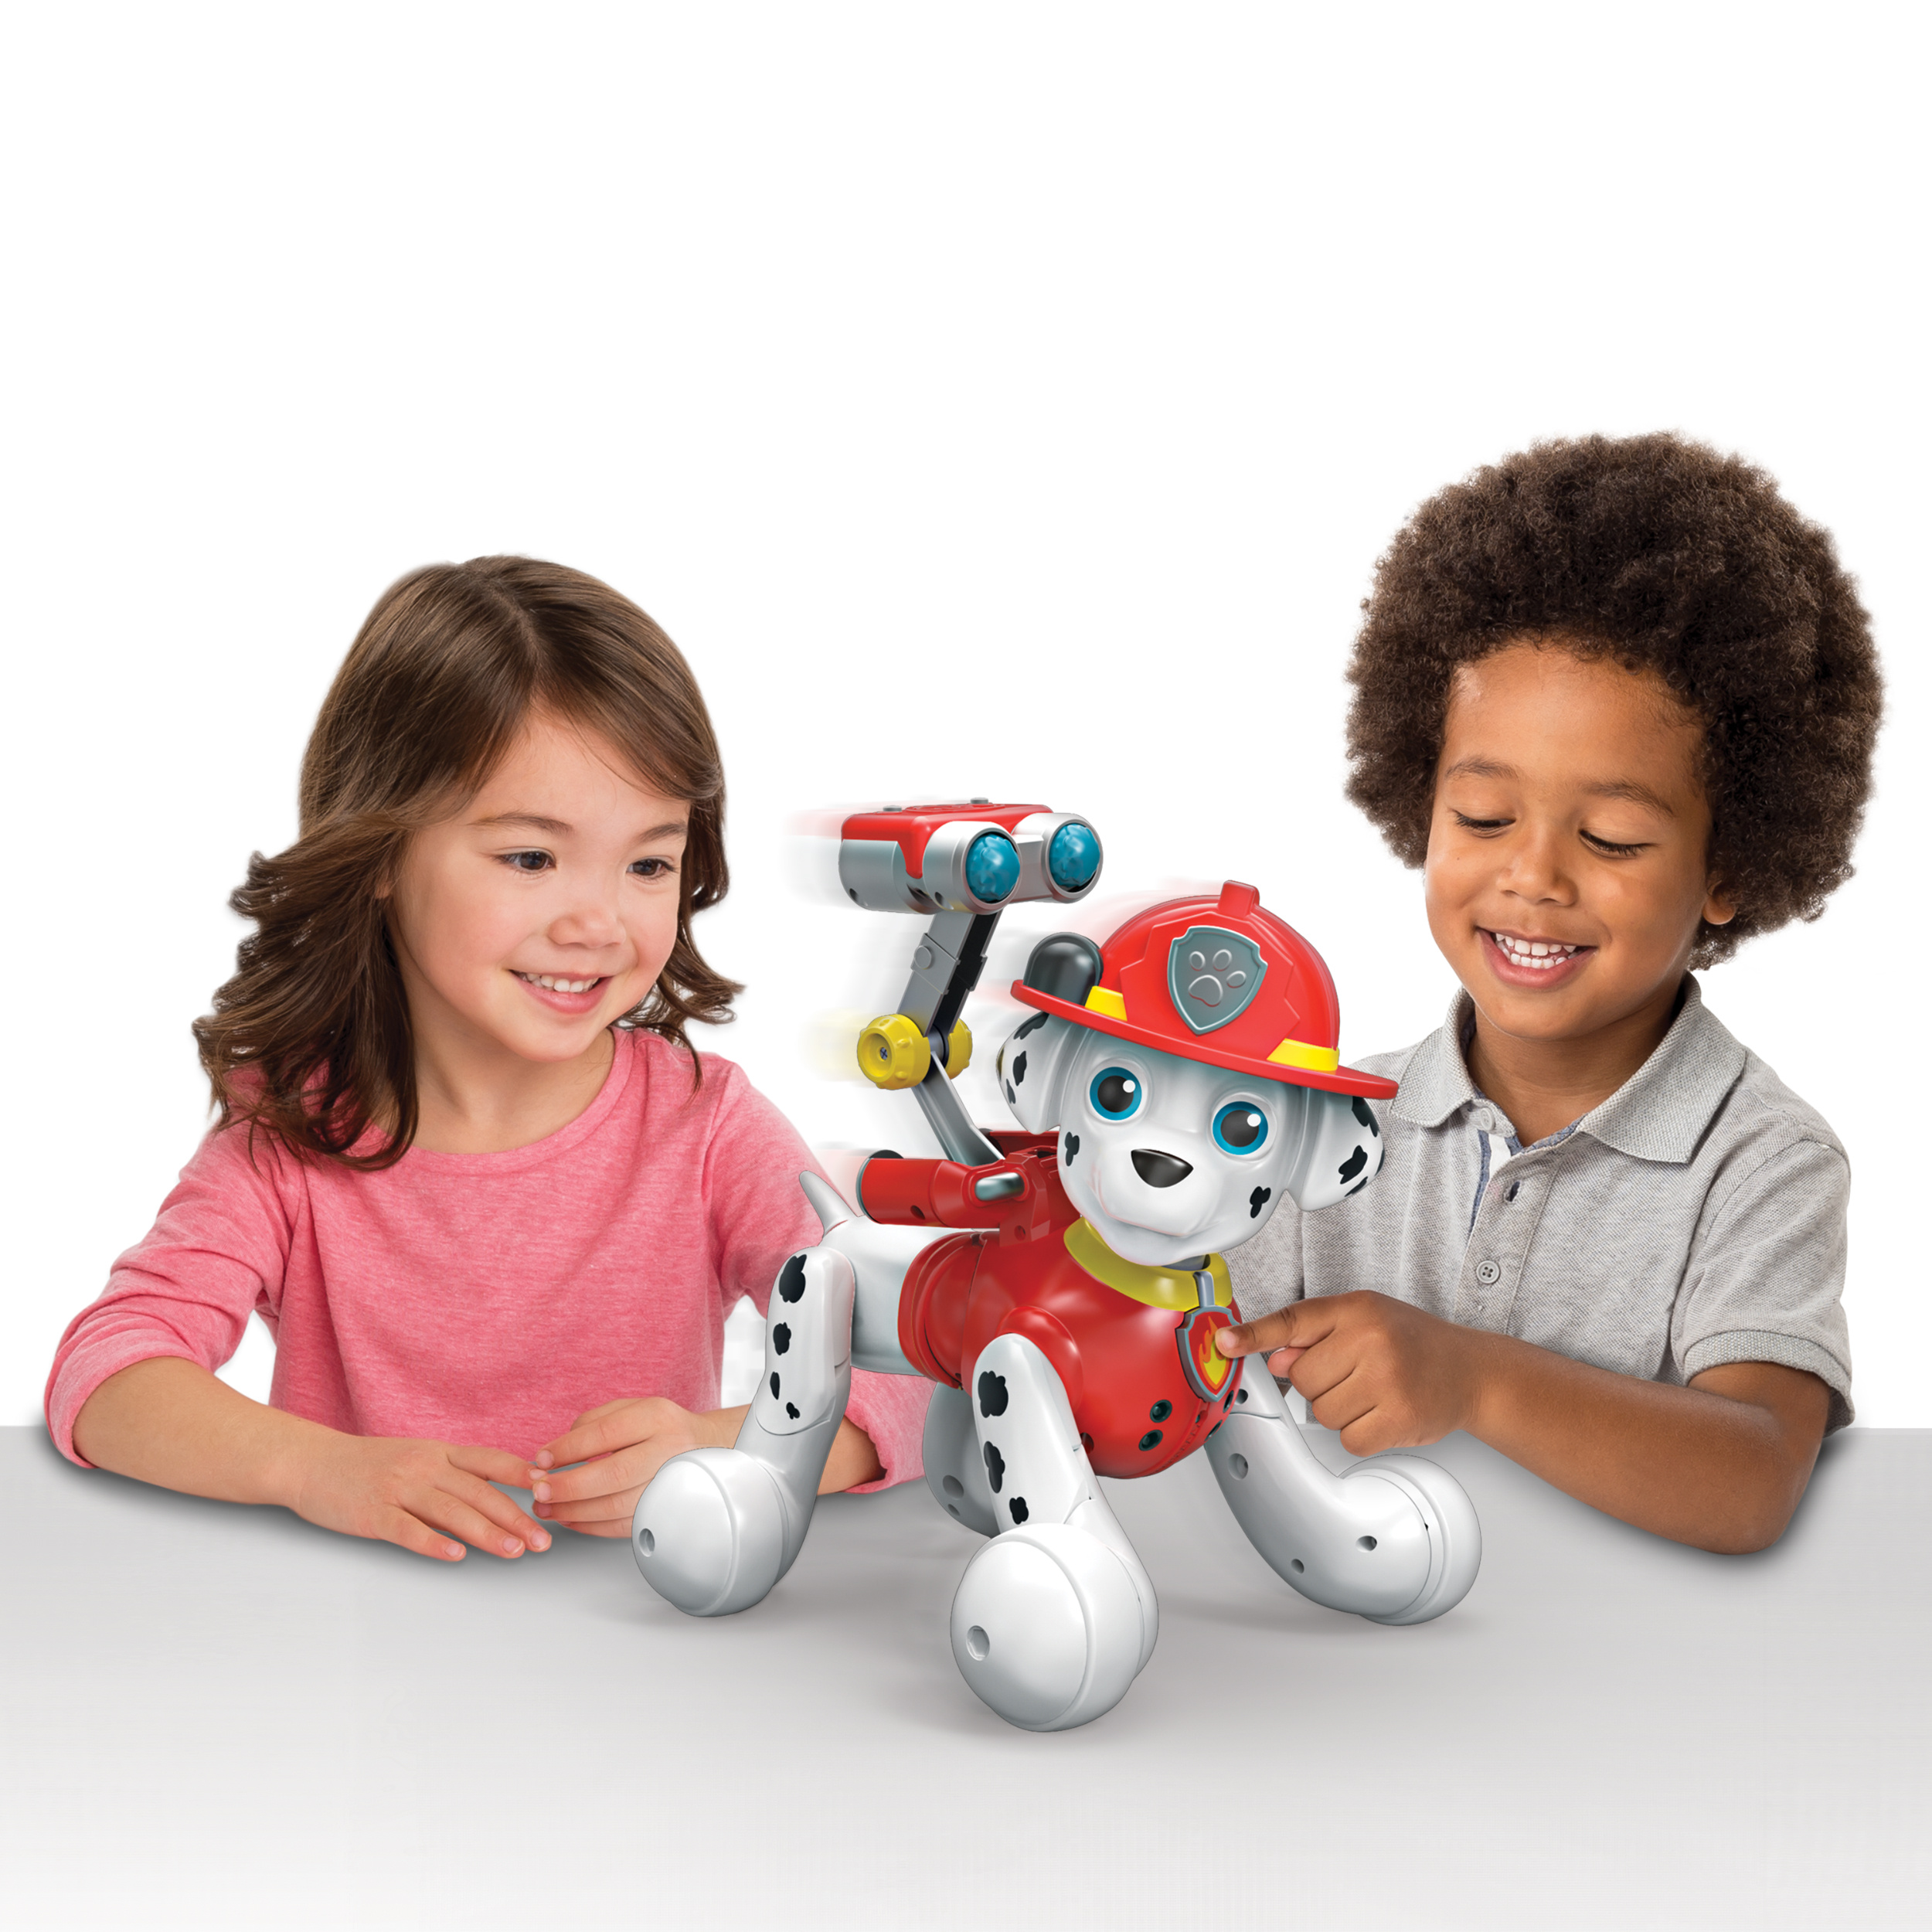 Paw Patrol, Zoomer Marshall, Interactive Pup with Missions, Sounds and Phrases, by Spin Master - image 2 of 8